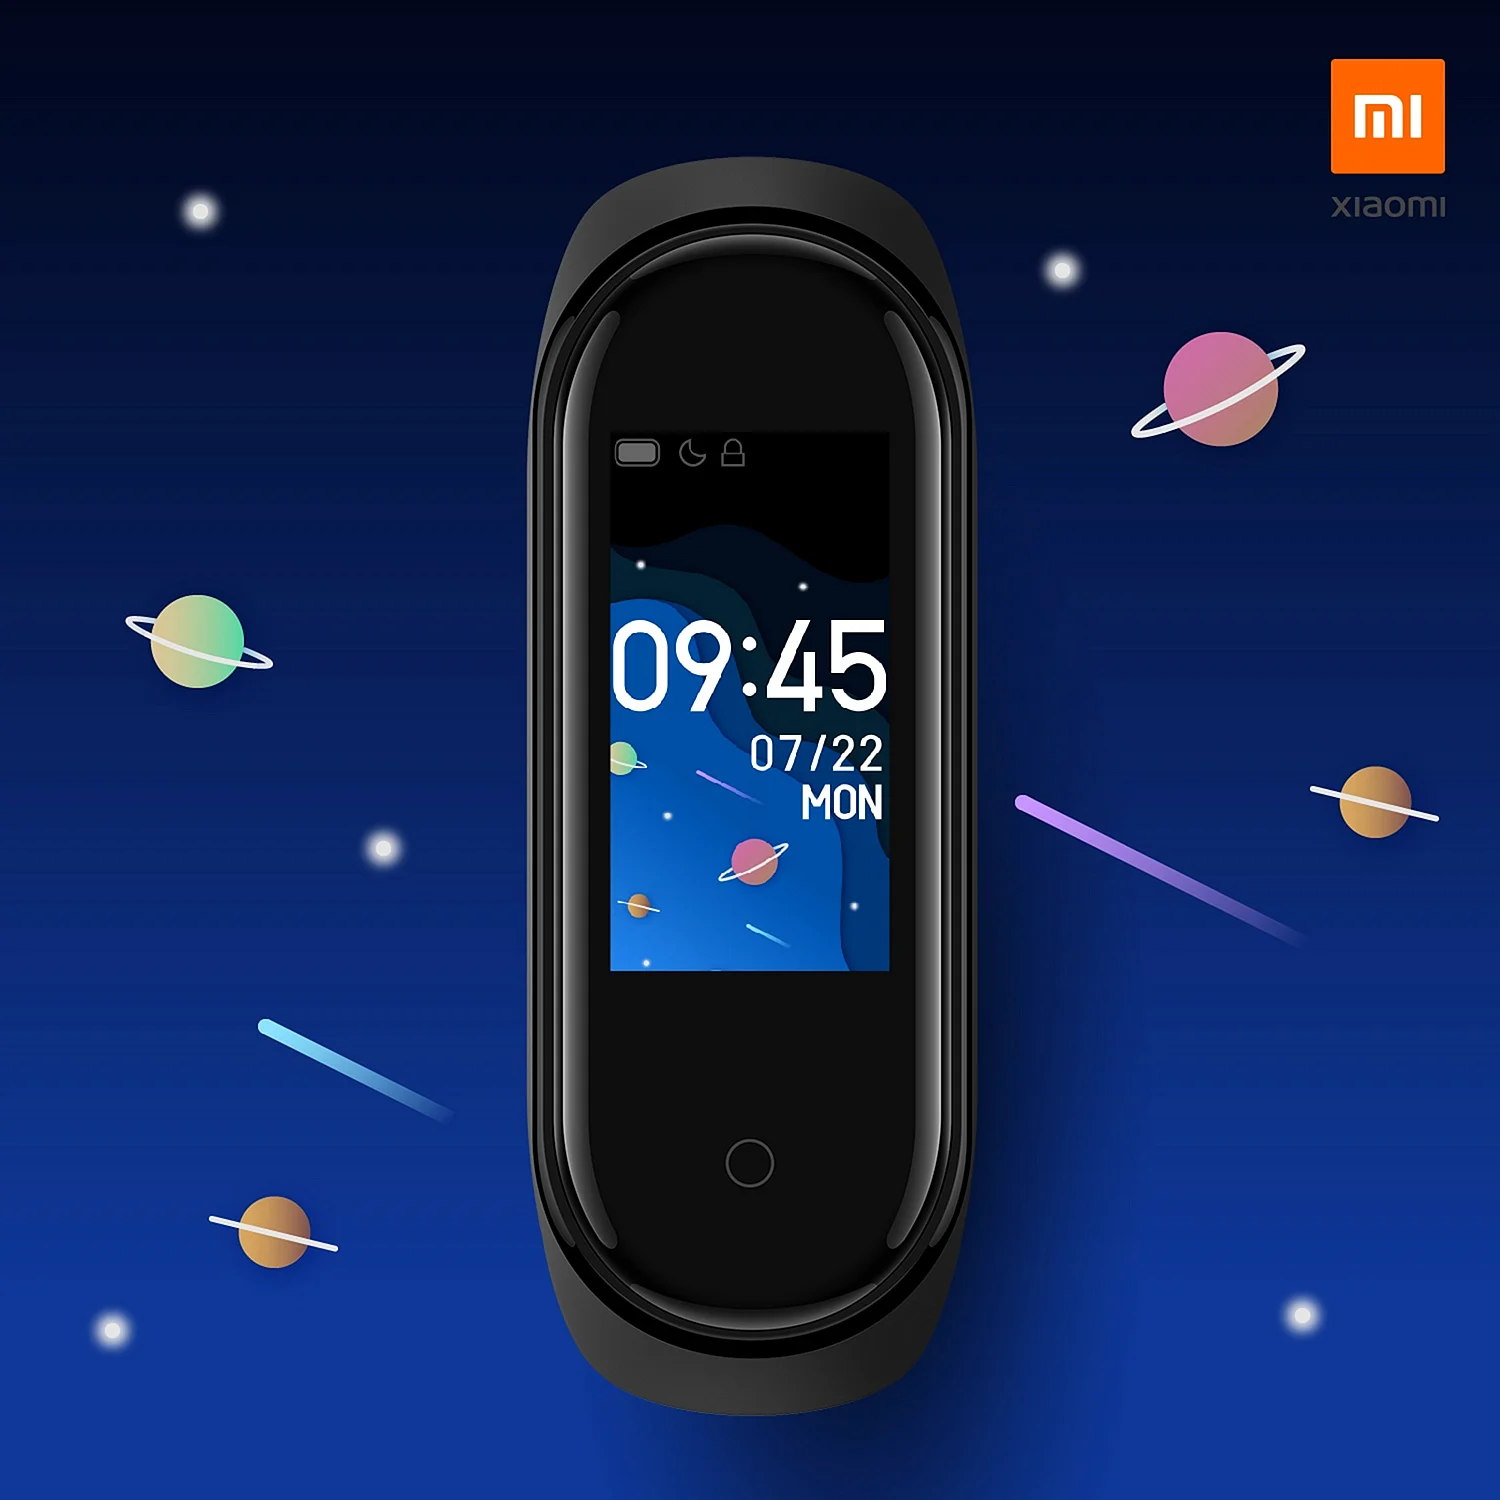 For Mi Band Wallpaper